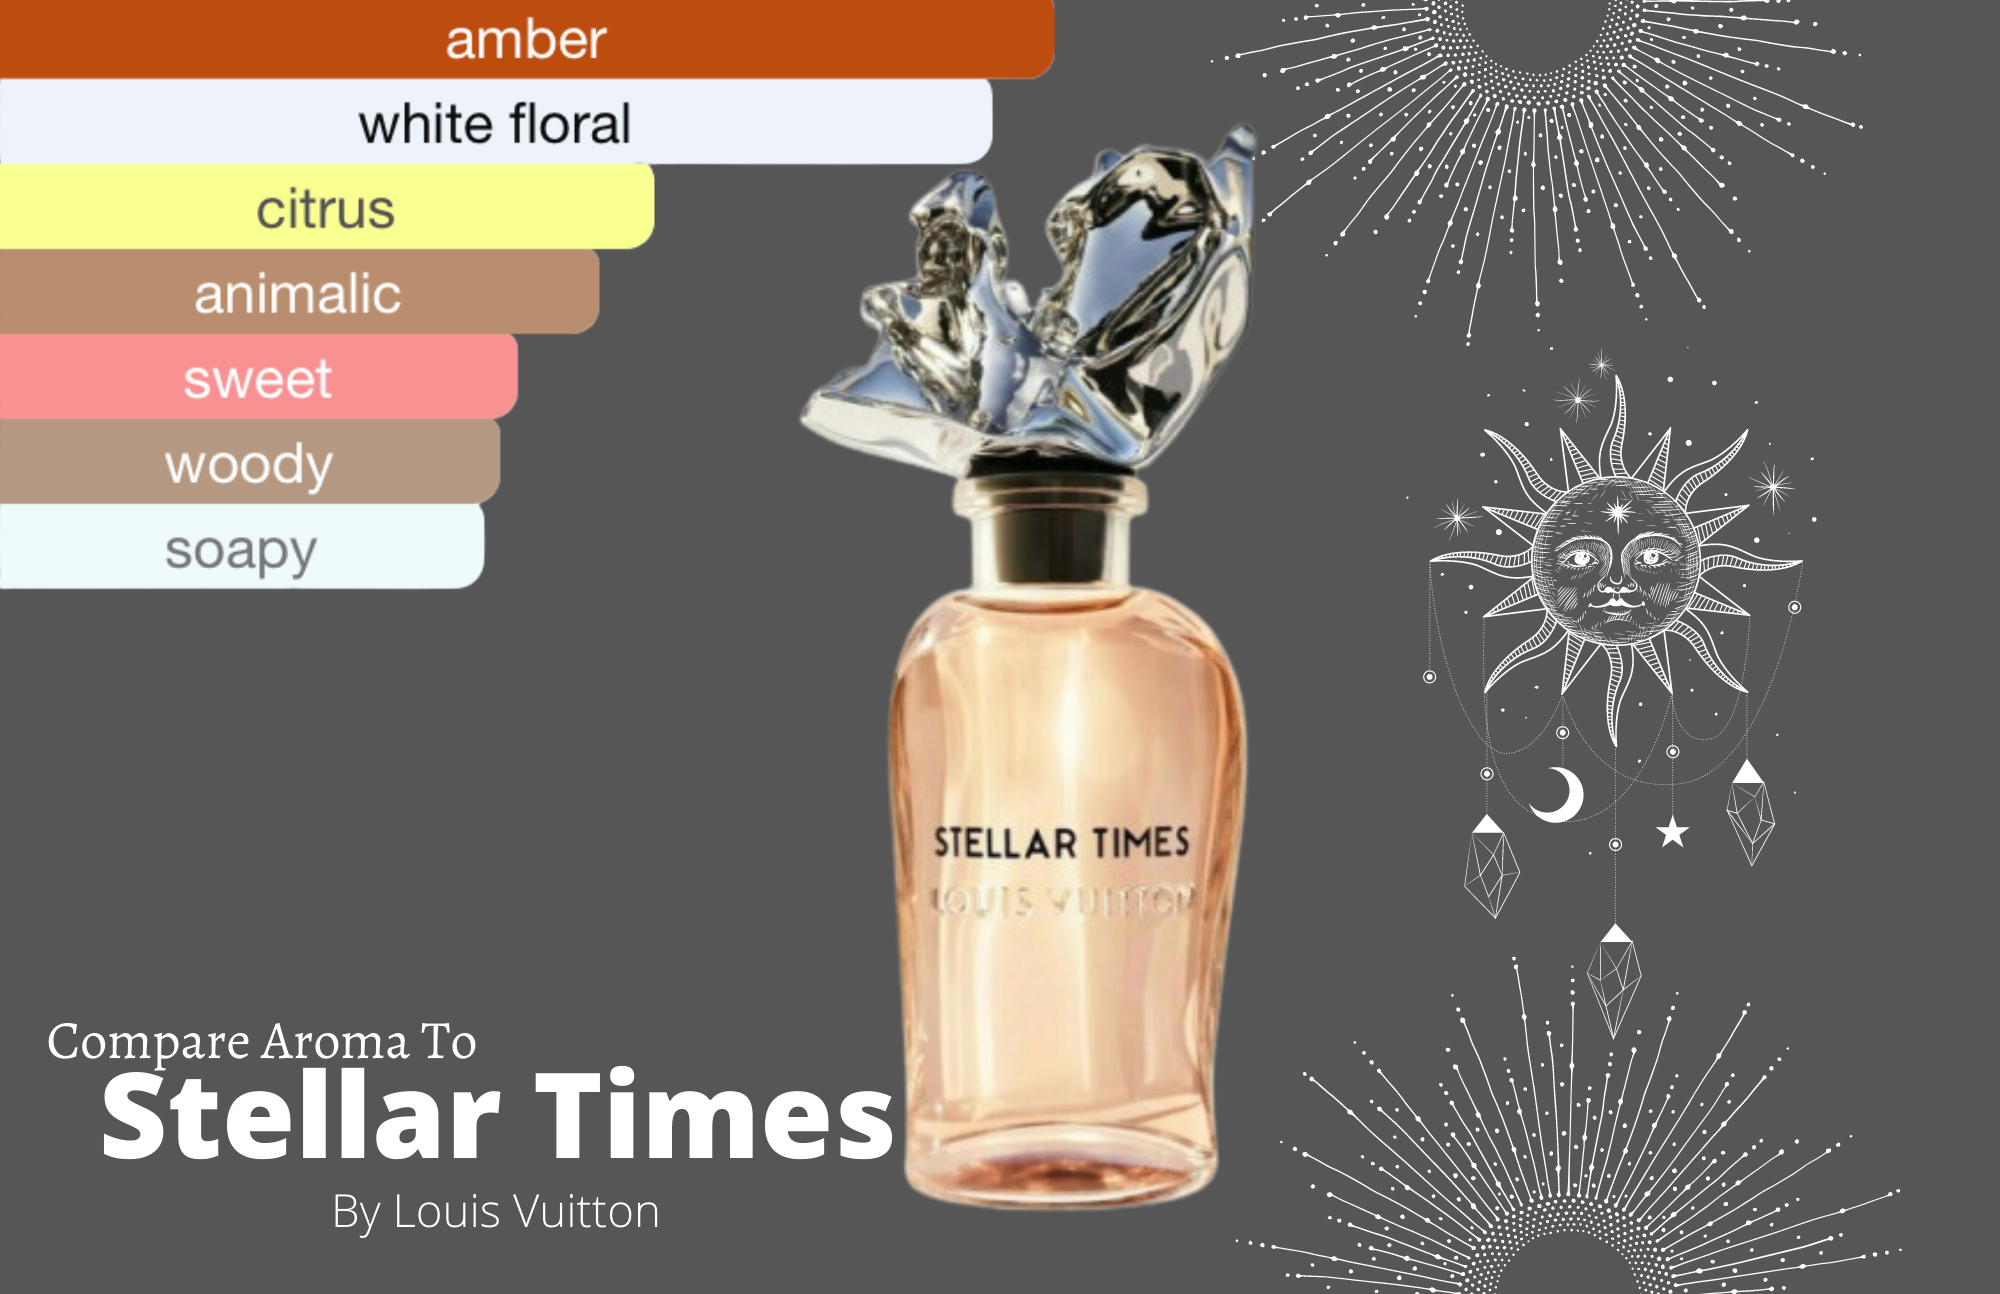 Compare Aroma To Stellar Times